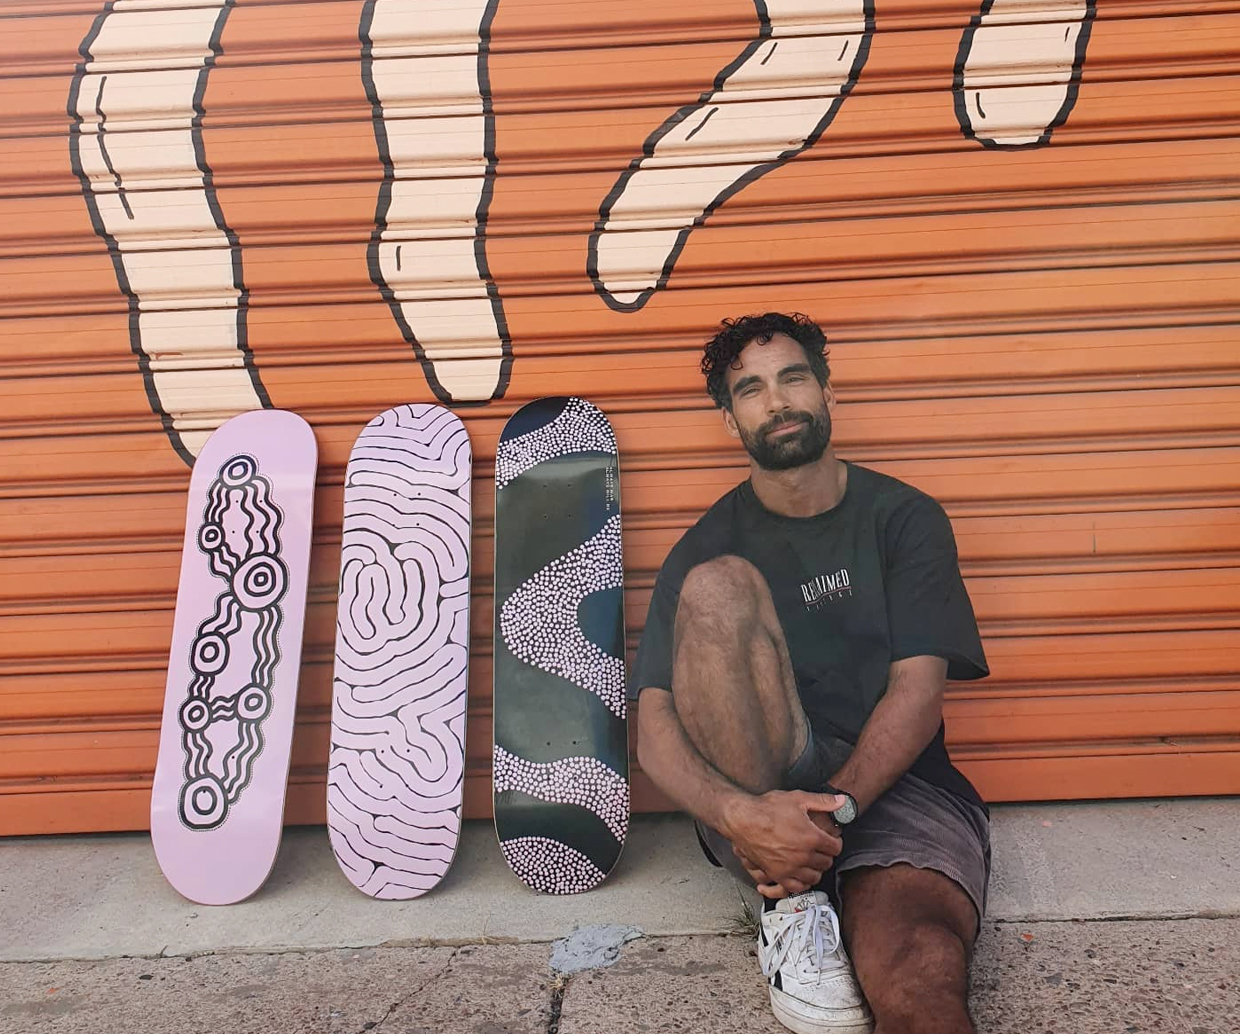 man leaning against garage door with three skateboards and his artwork on them